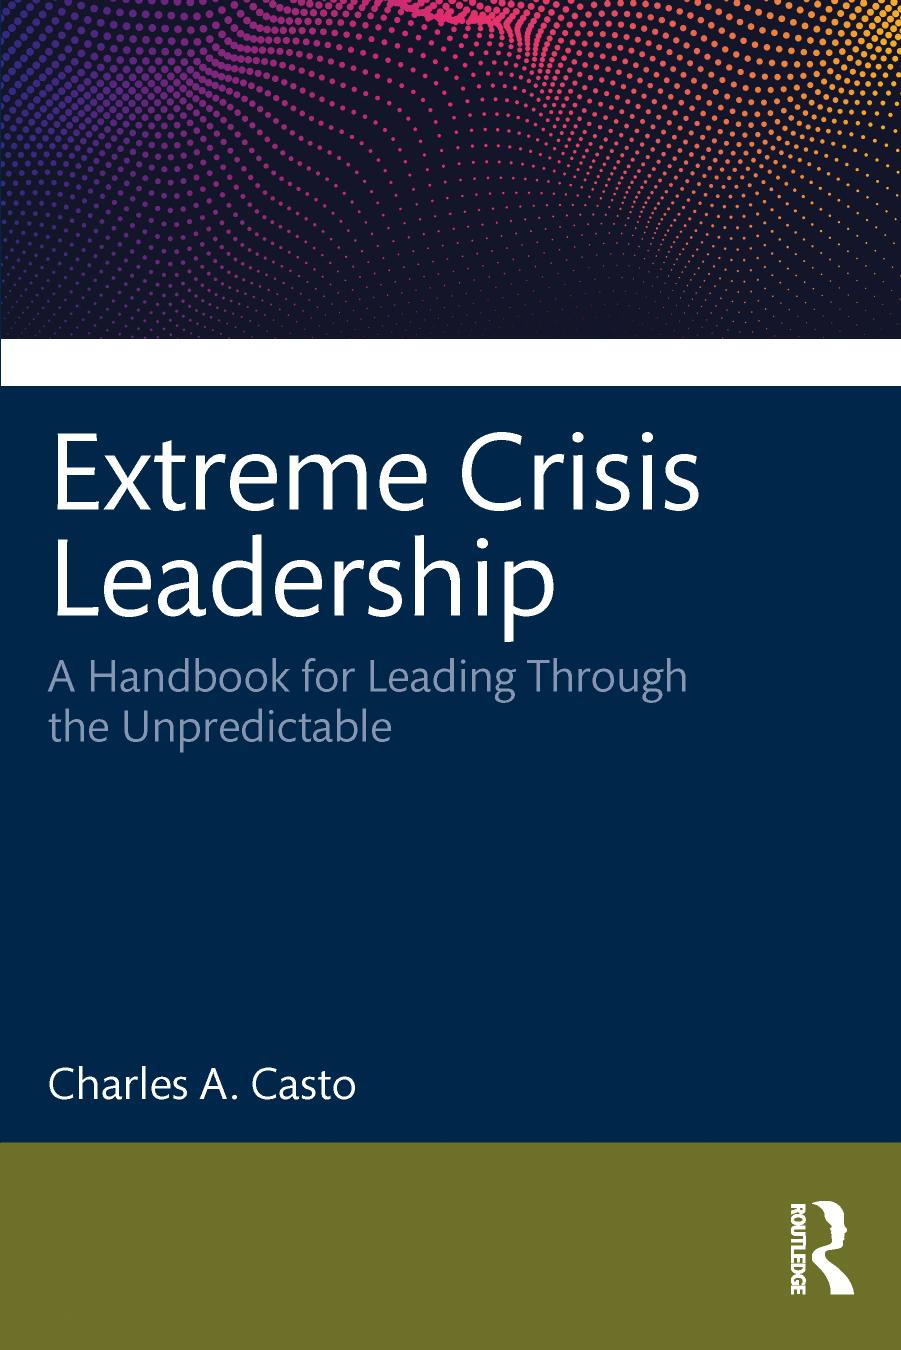 Extreme Crisis Leadership: A Handbook for Leading Through the Unpredictable by Charles A. Casto